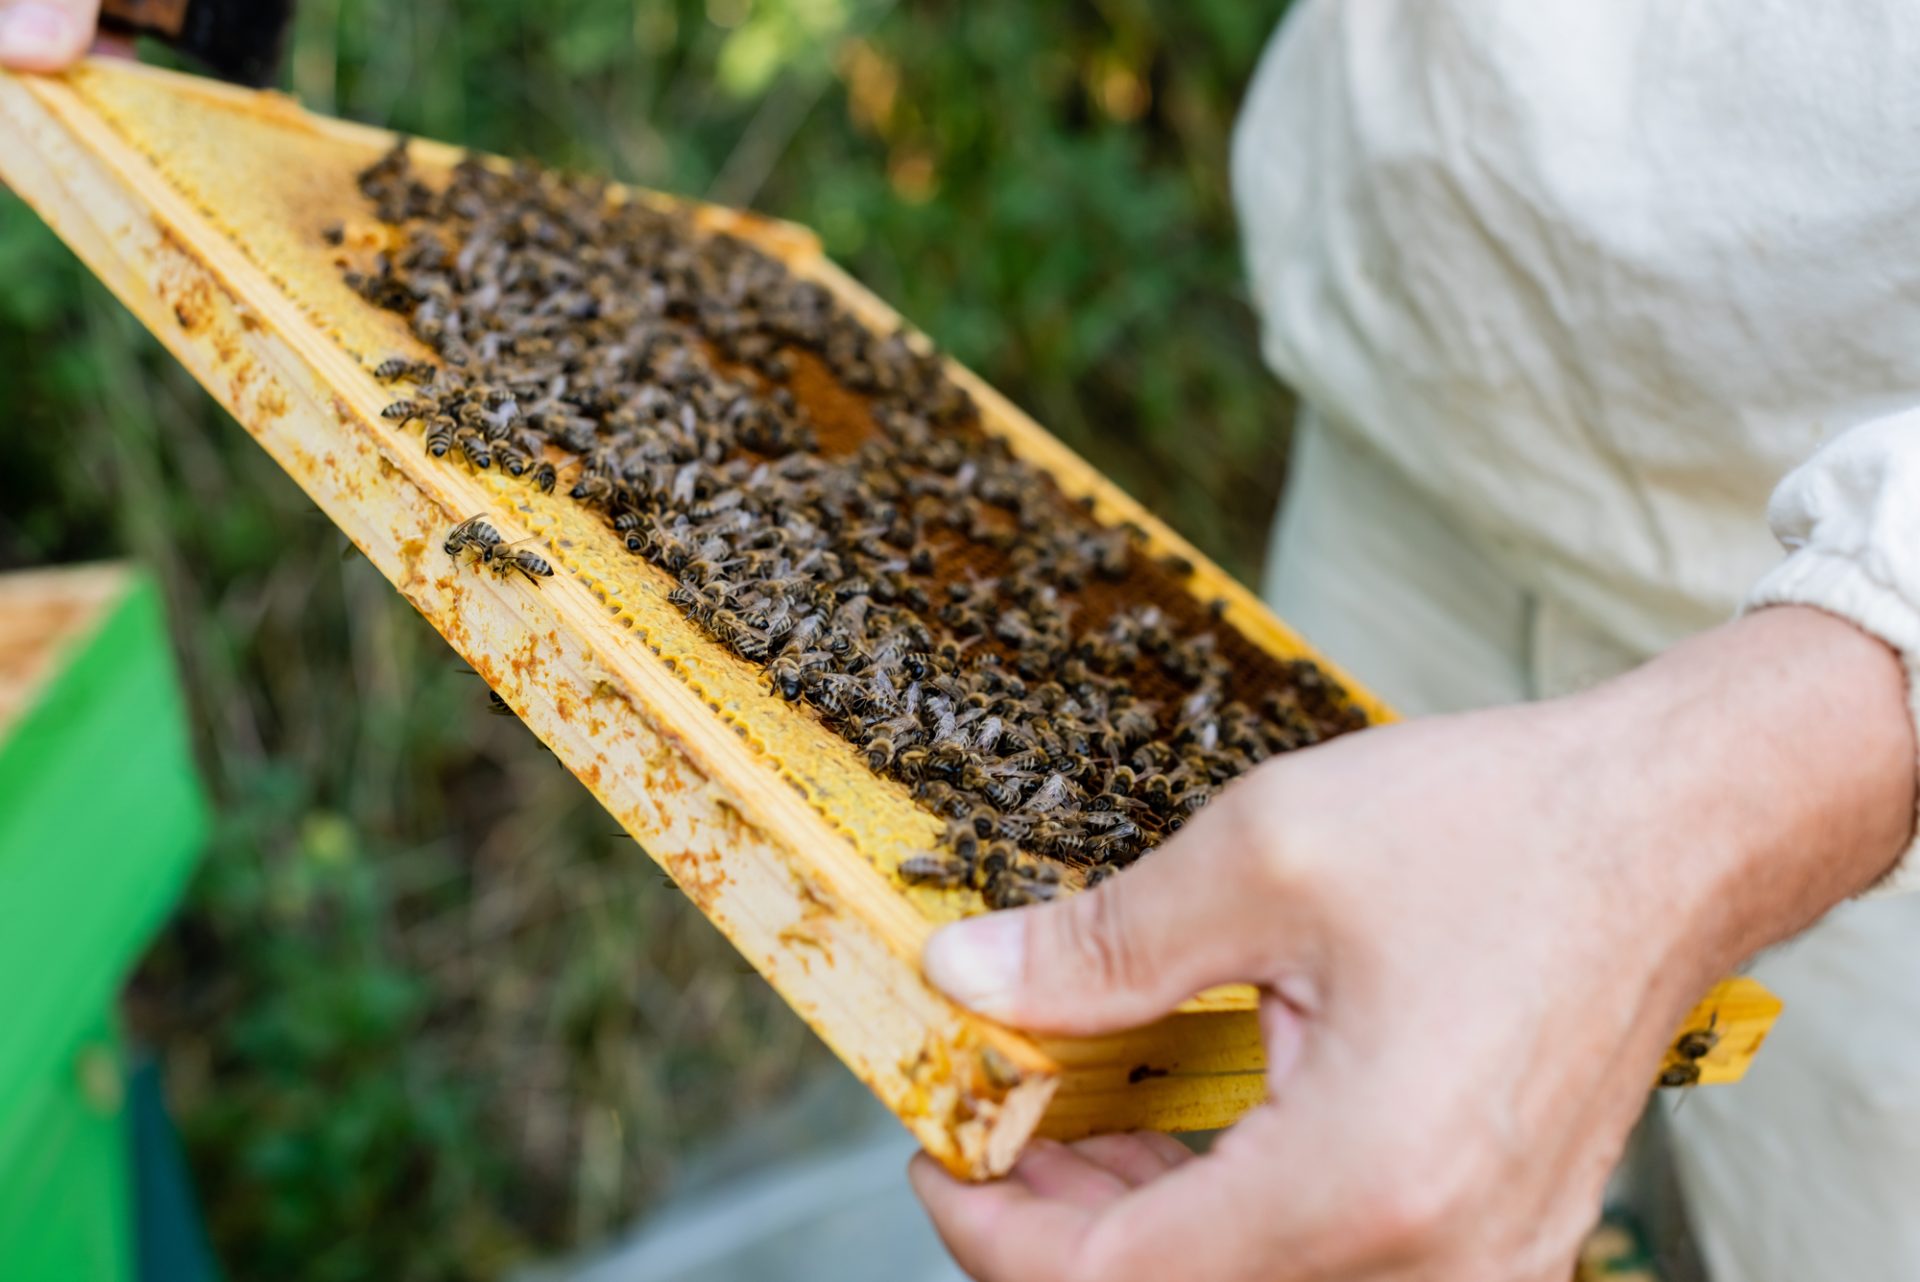 Benefits of Conservation Beekeeping